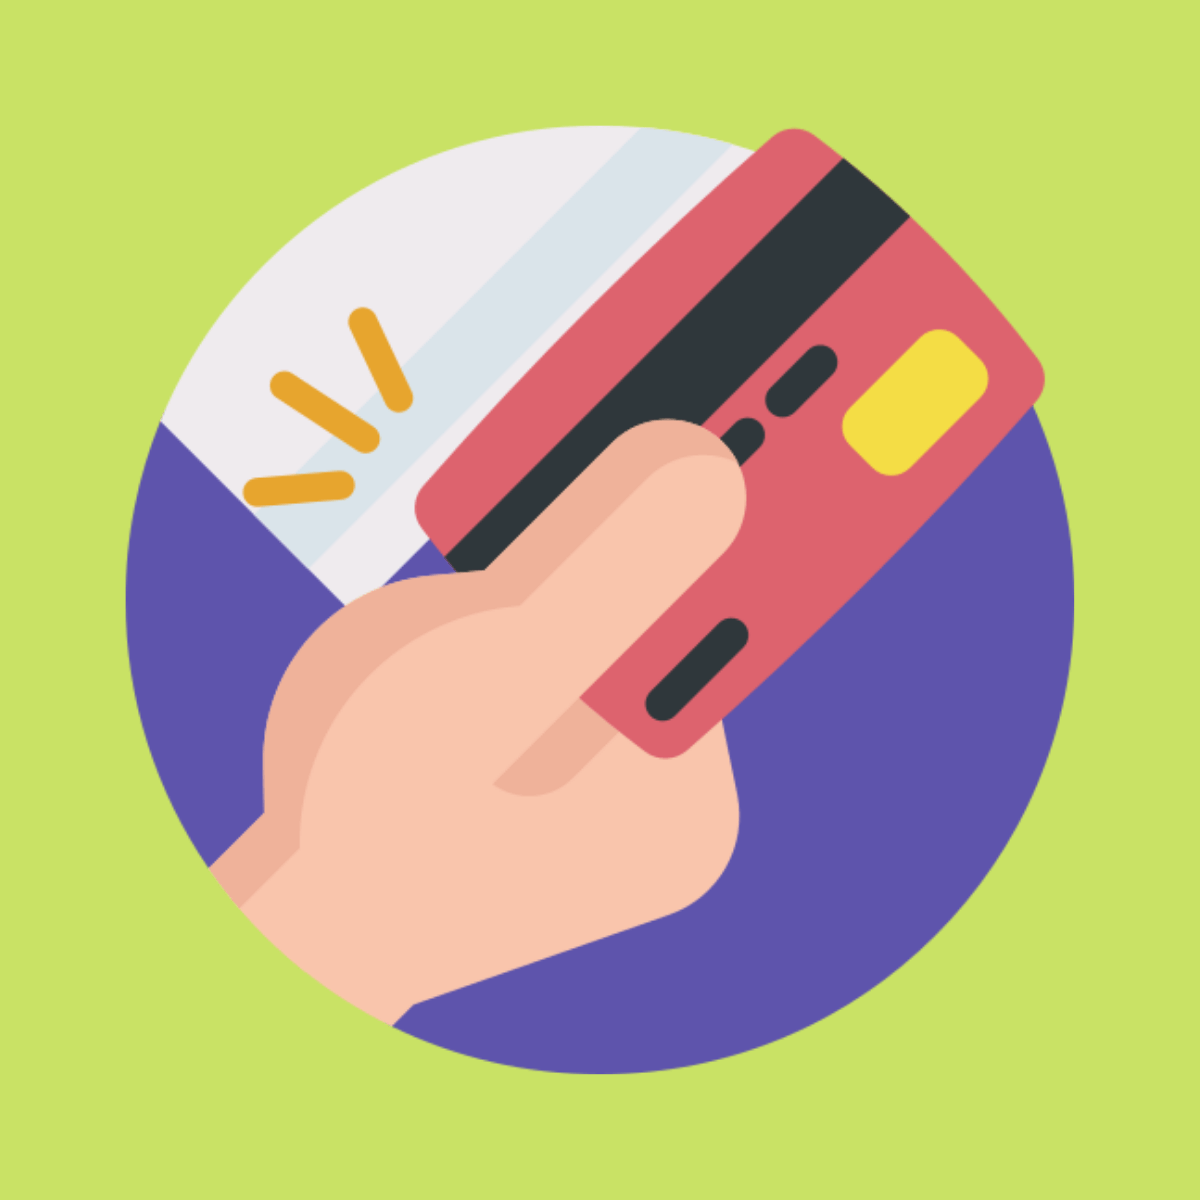 Does Buy Now Pay Later Affect Your Credit Score?